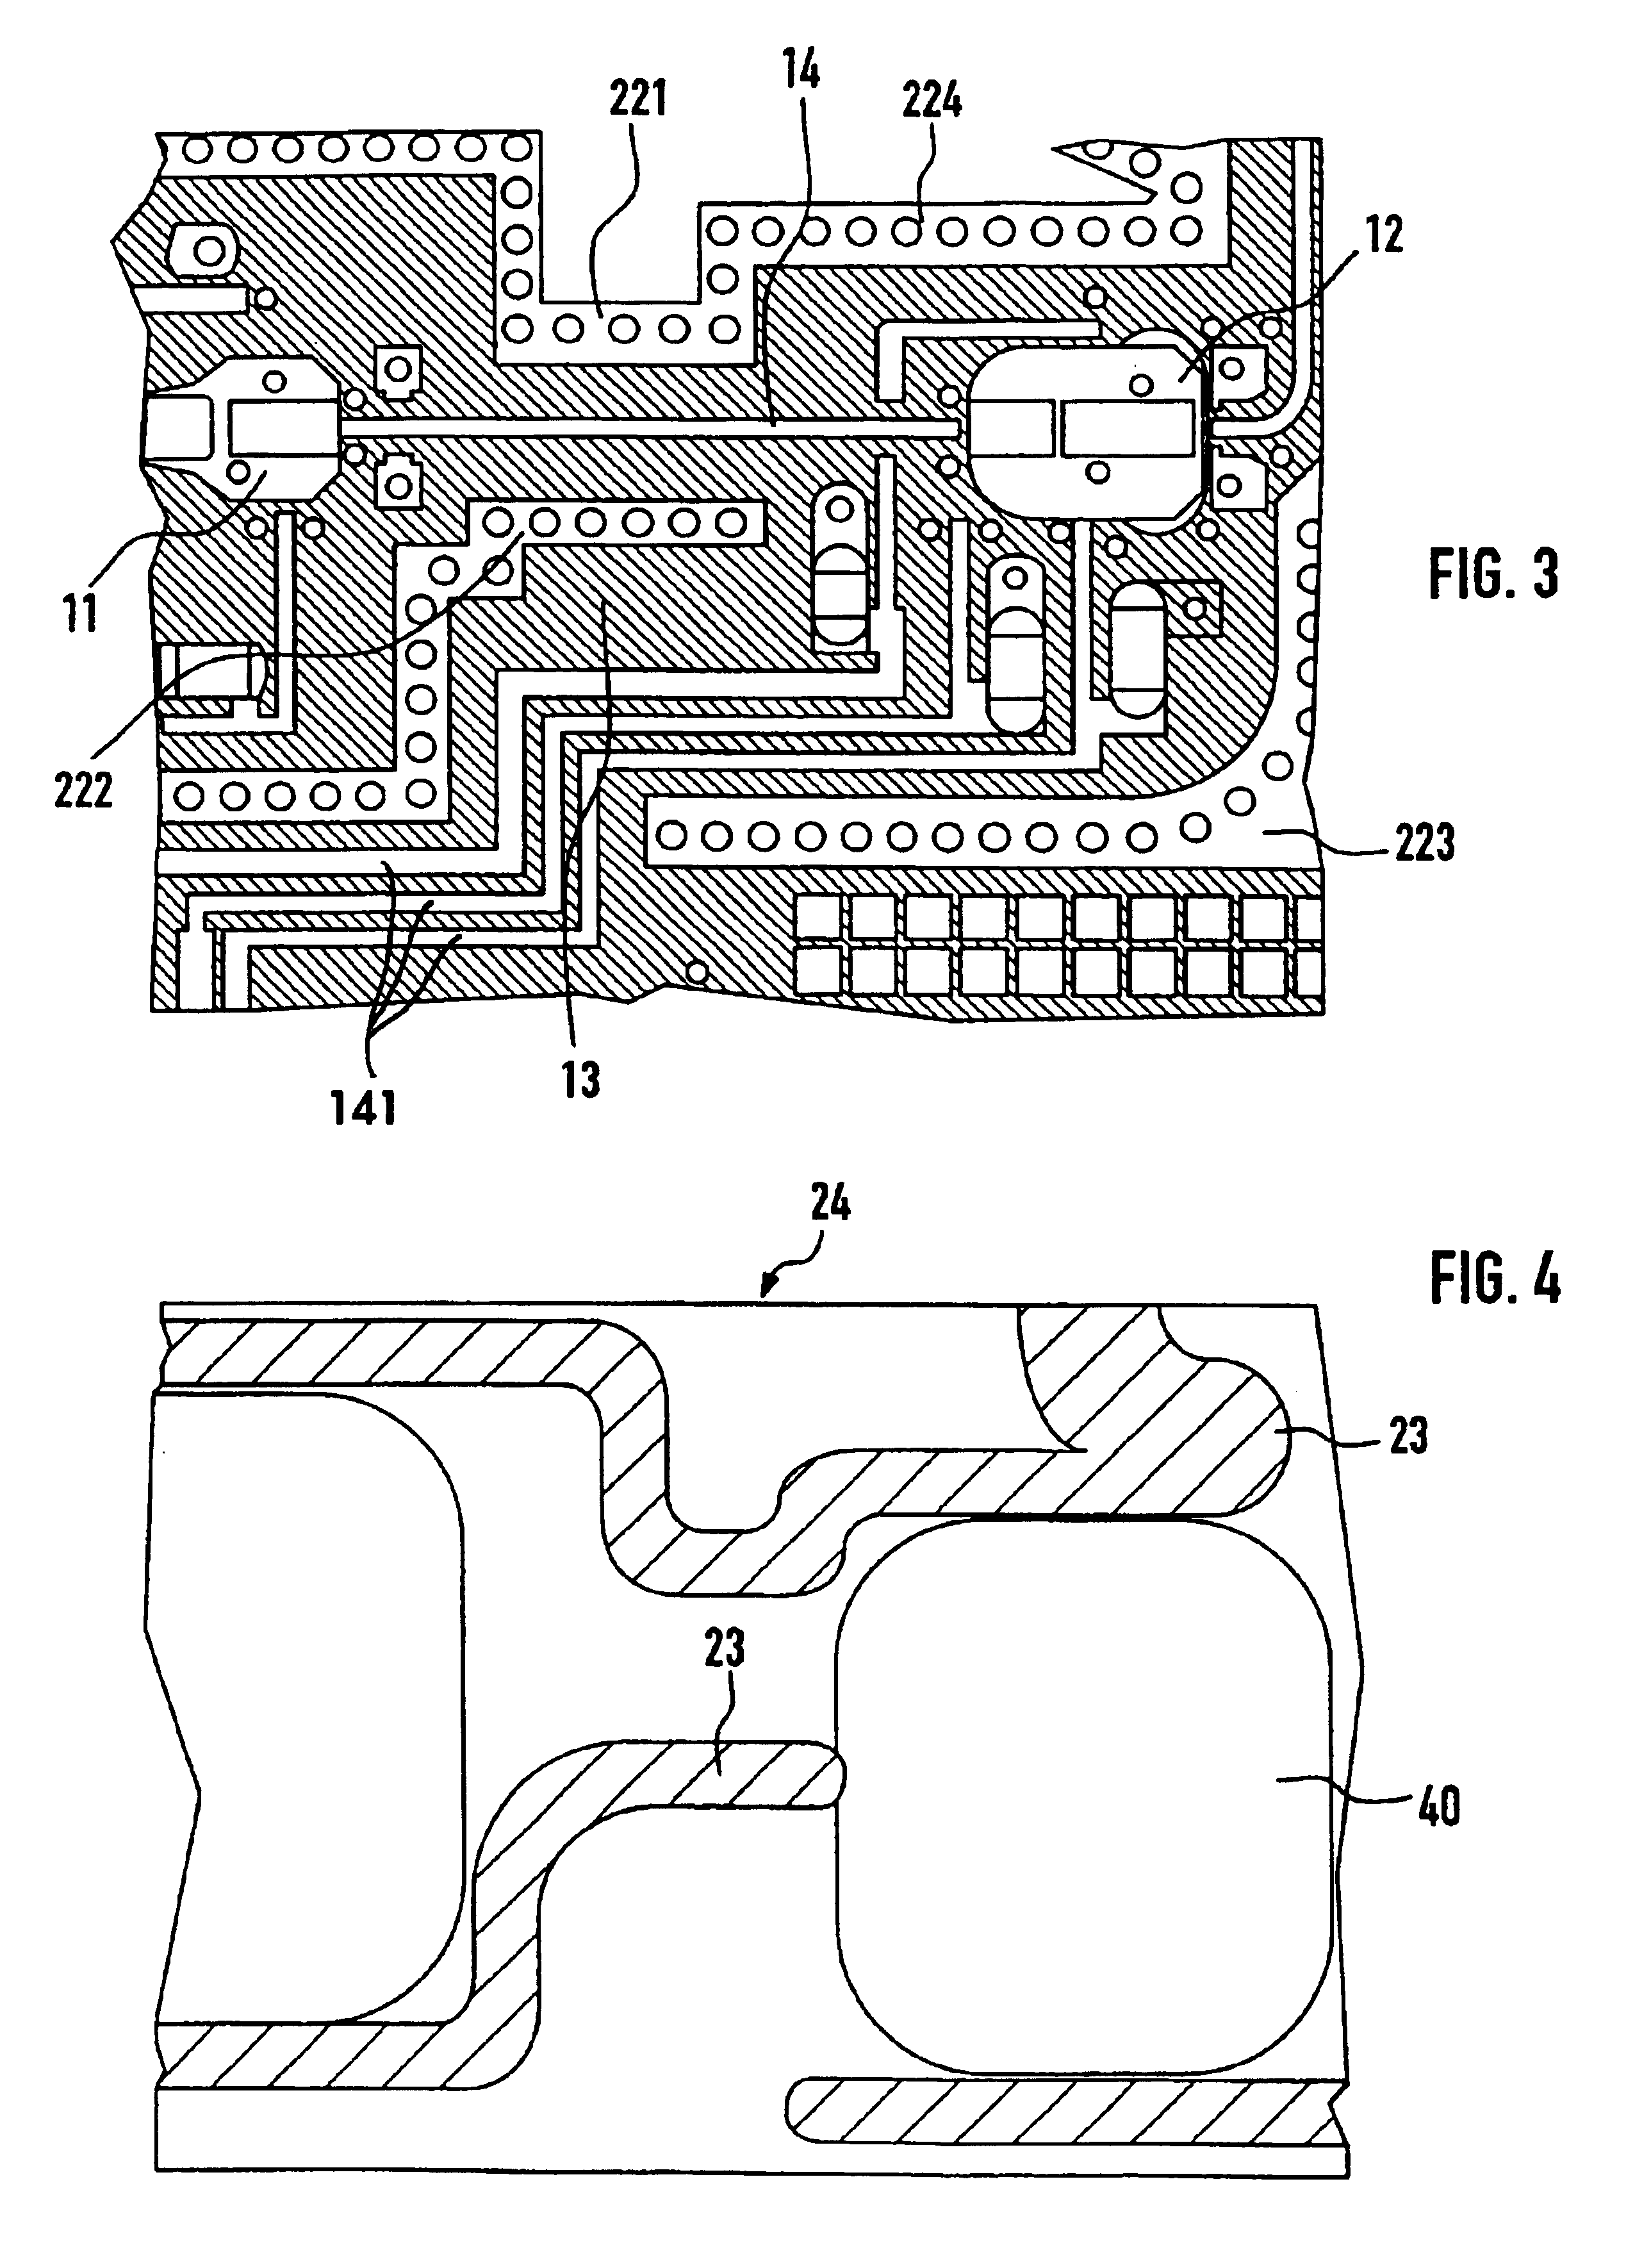 Integrated microwave filter module with a cover bonded by strips of conductive paste